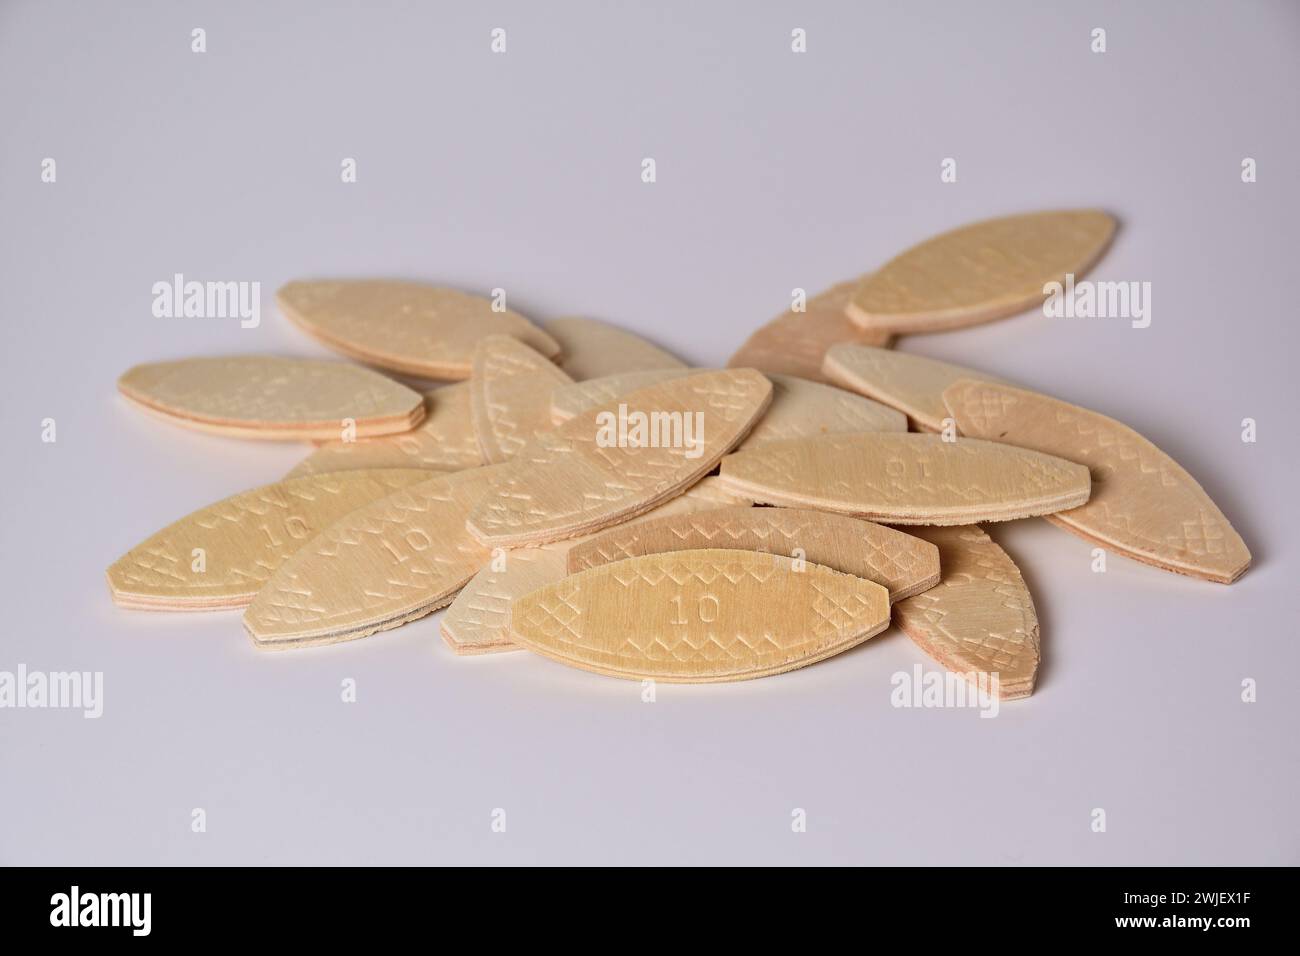 Biscuit joint isolated on light background.  Woodworking. Stock Photo